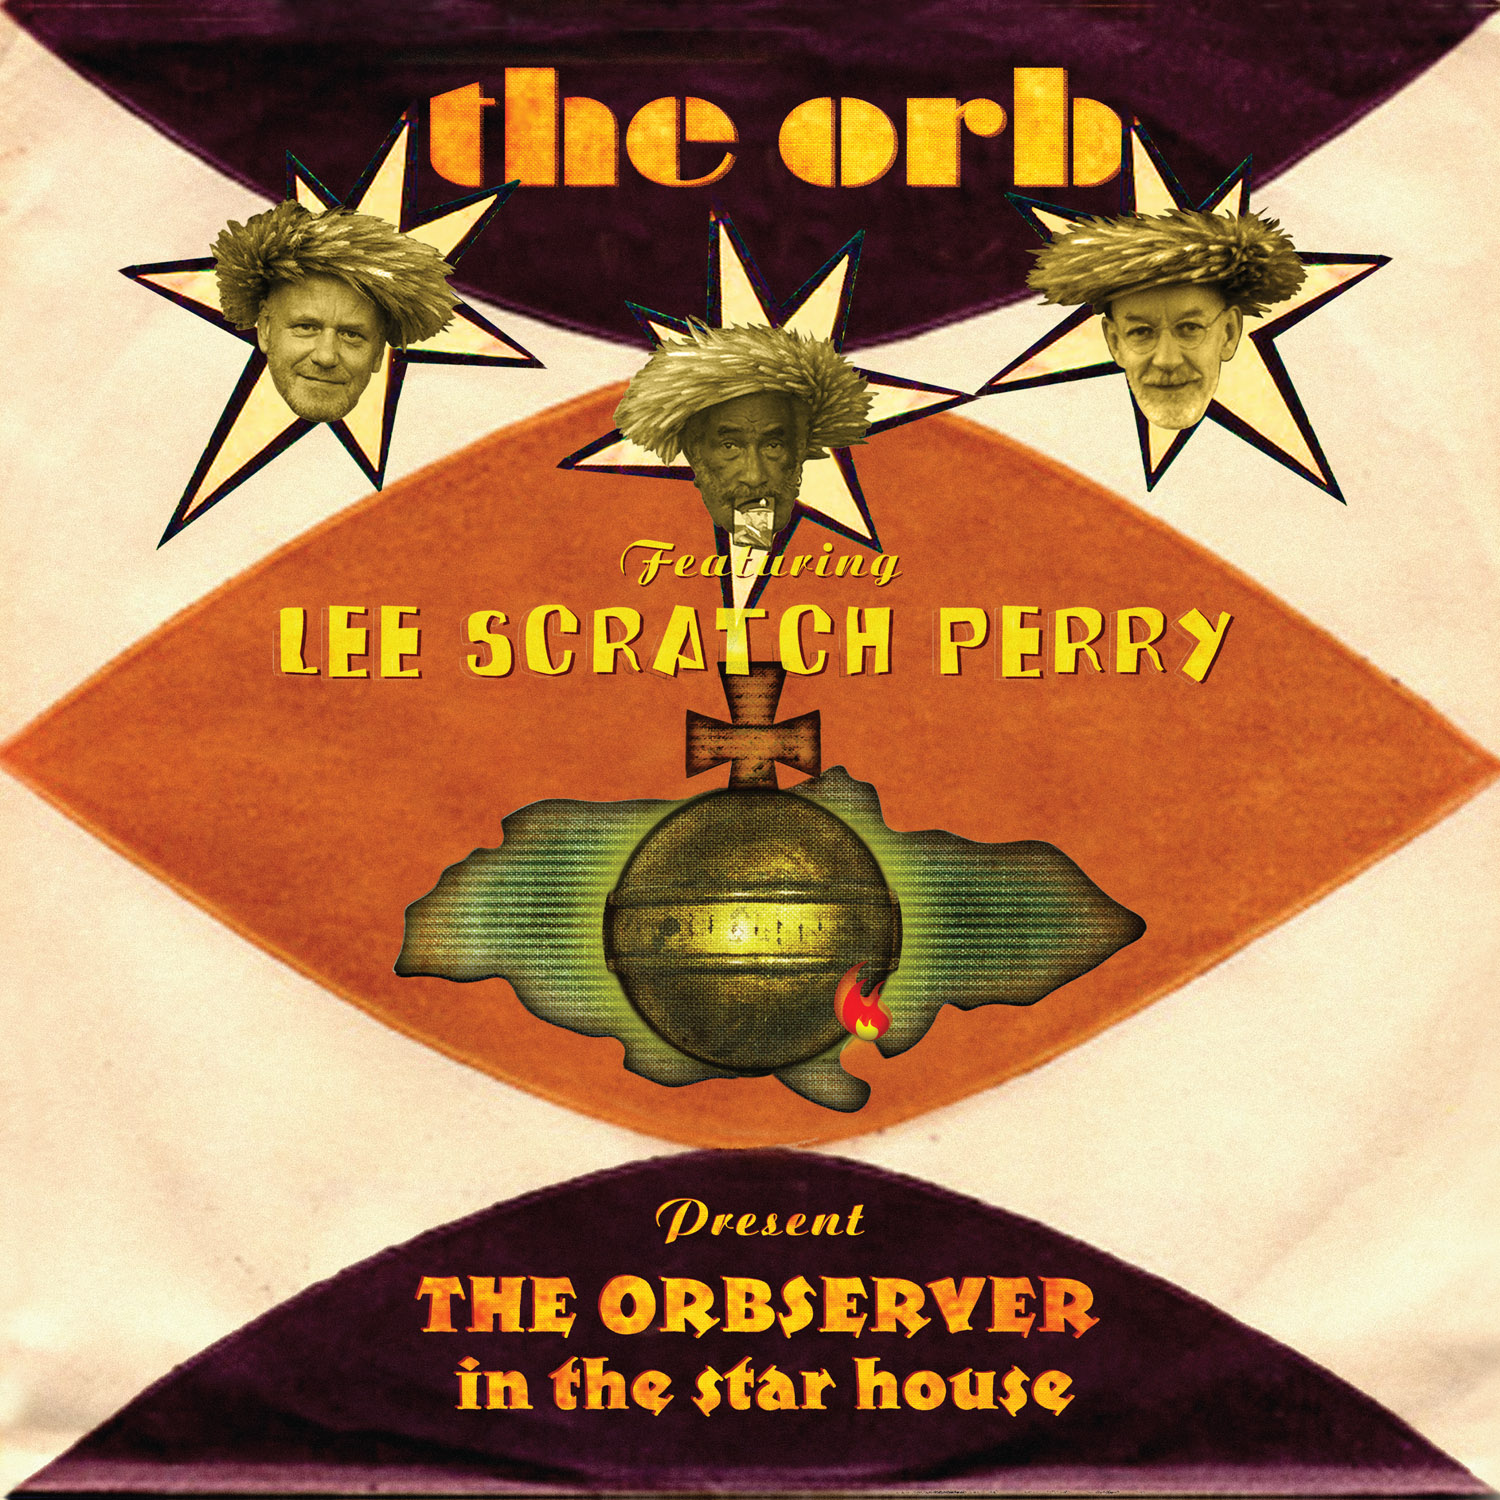 VIDEO: The Orb ft. Lee Scratch Perry